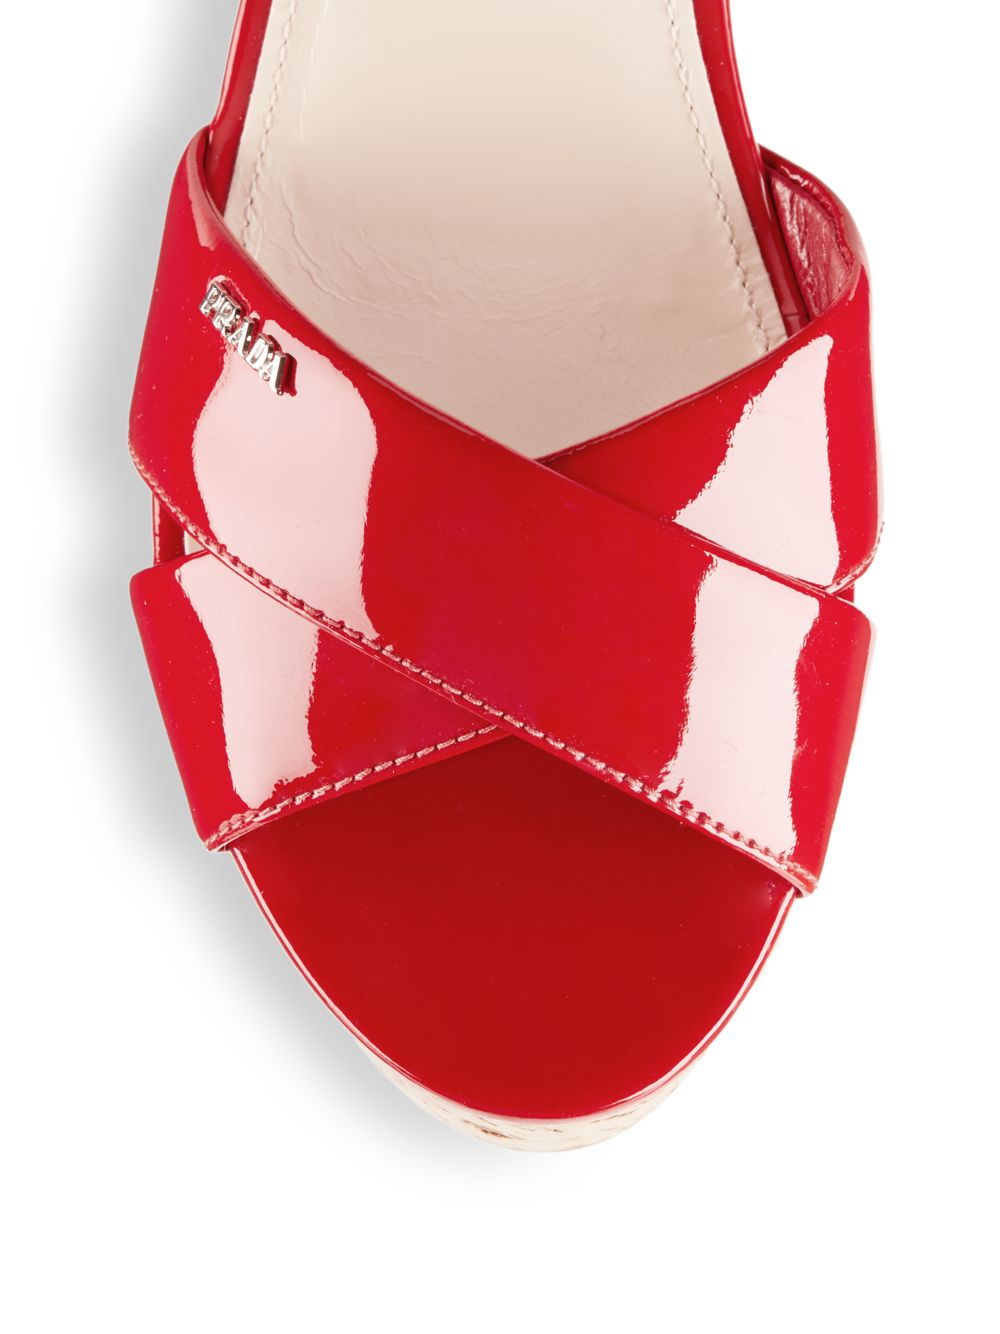 red patent leather sandals